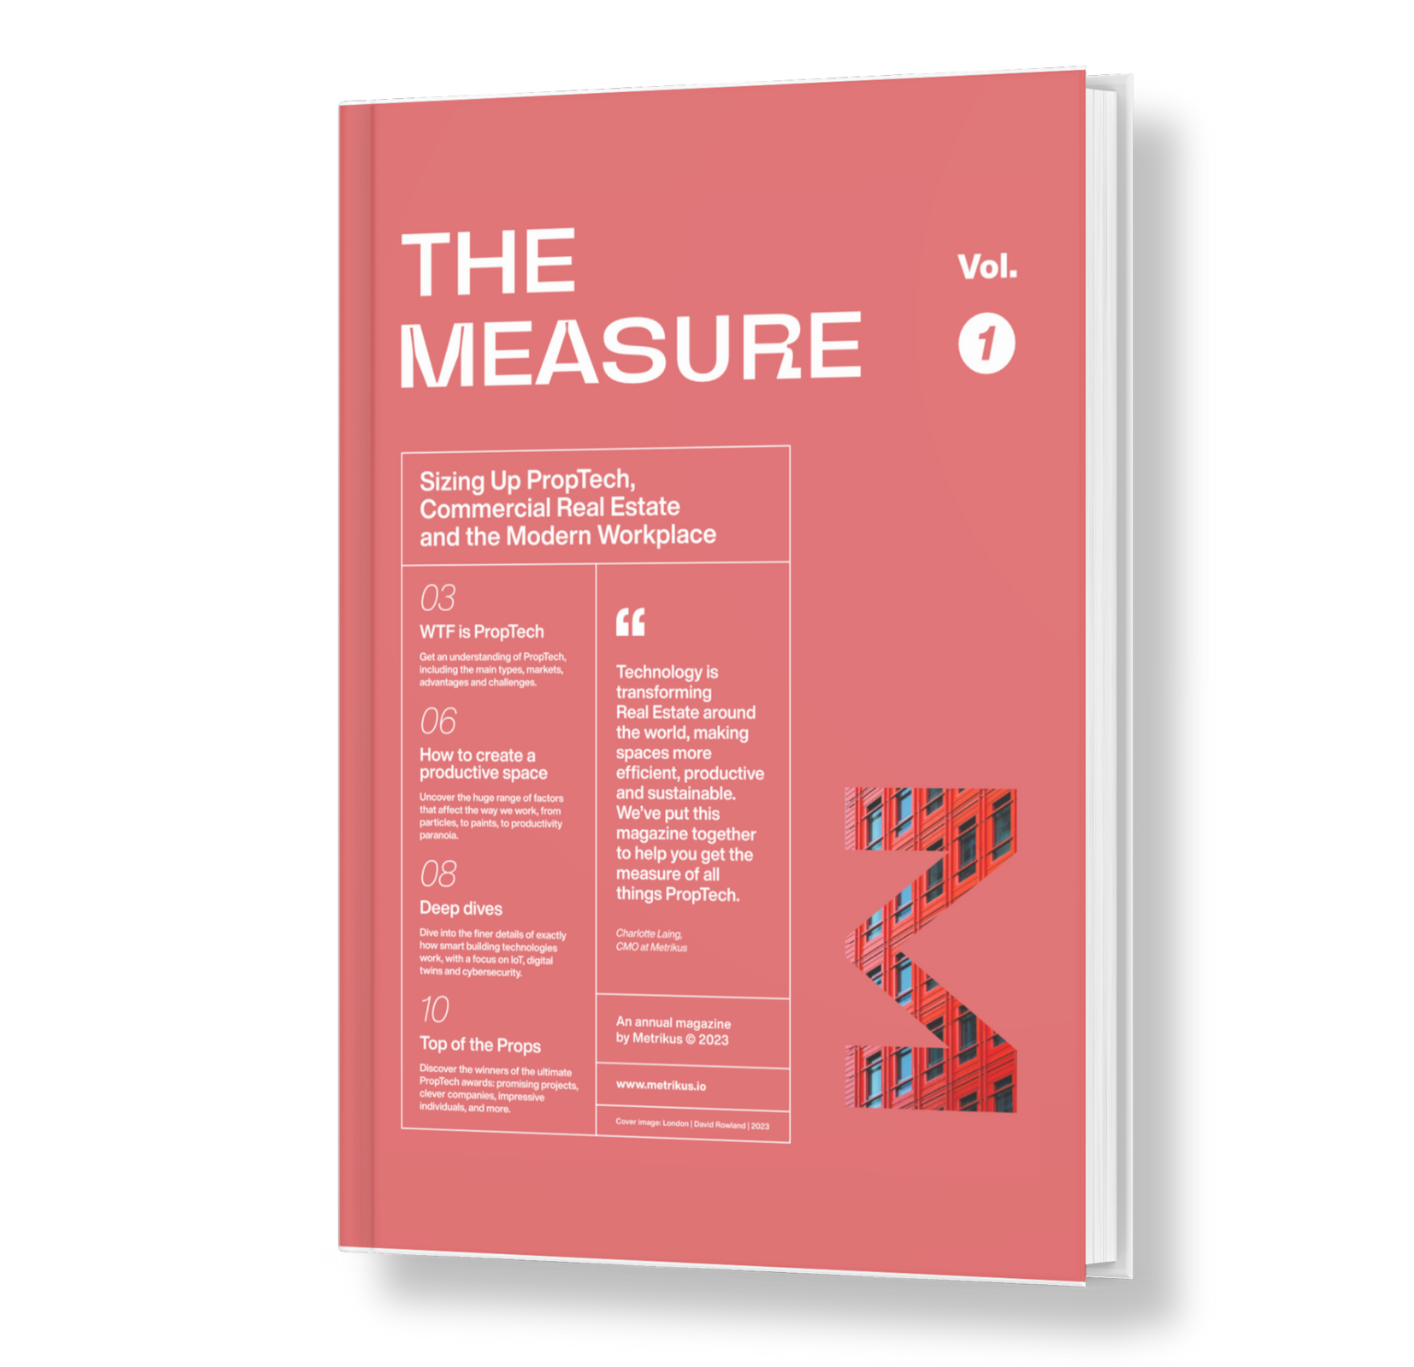 The Measure magazine: sizing up PropTech, Commercial Real Estate and the Modern Workplace